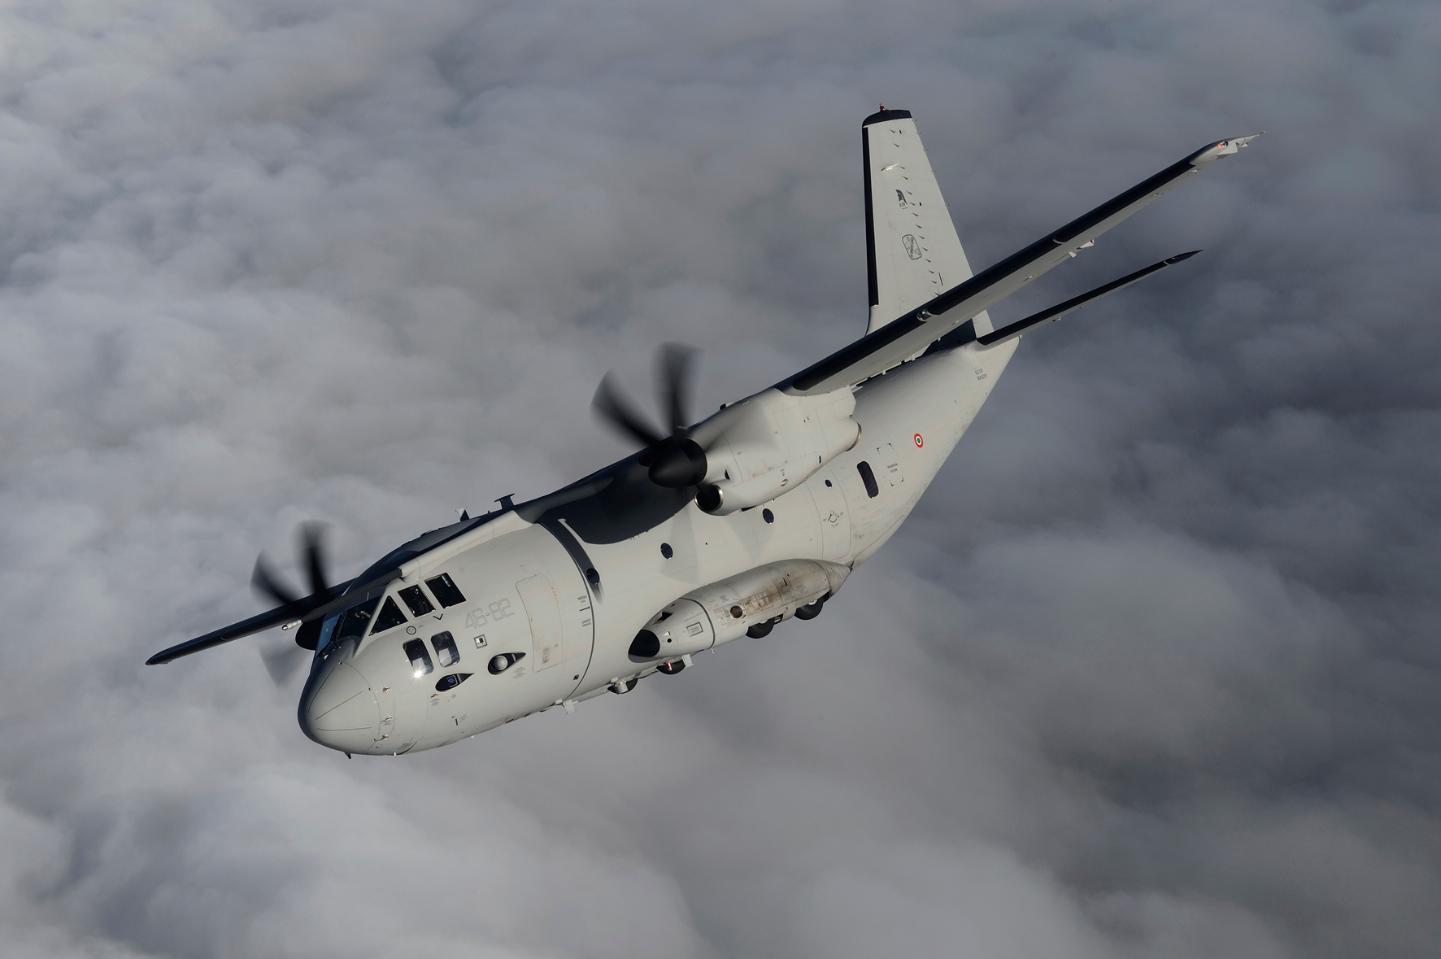 Leonardo Awarded Contract to Supply Slovenia with Second C-27J Spartan Transport Aircraft